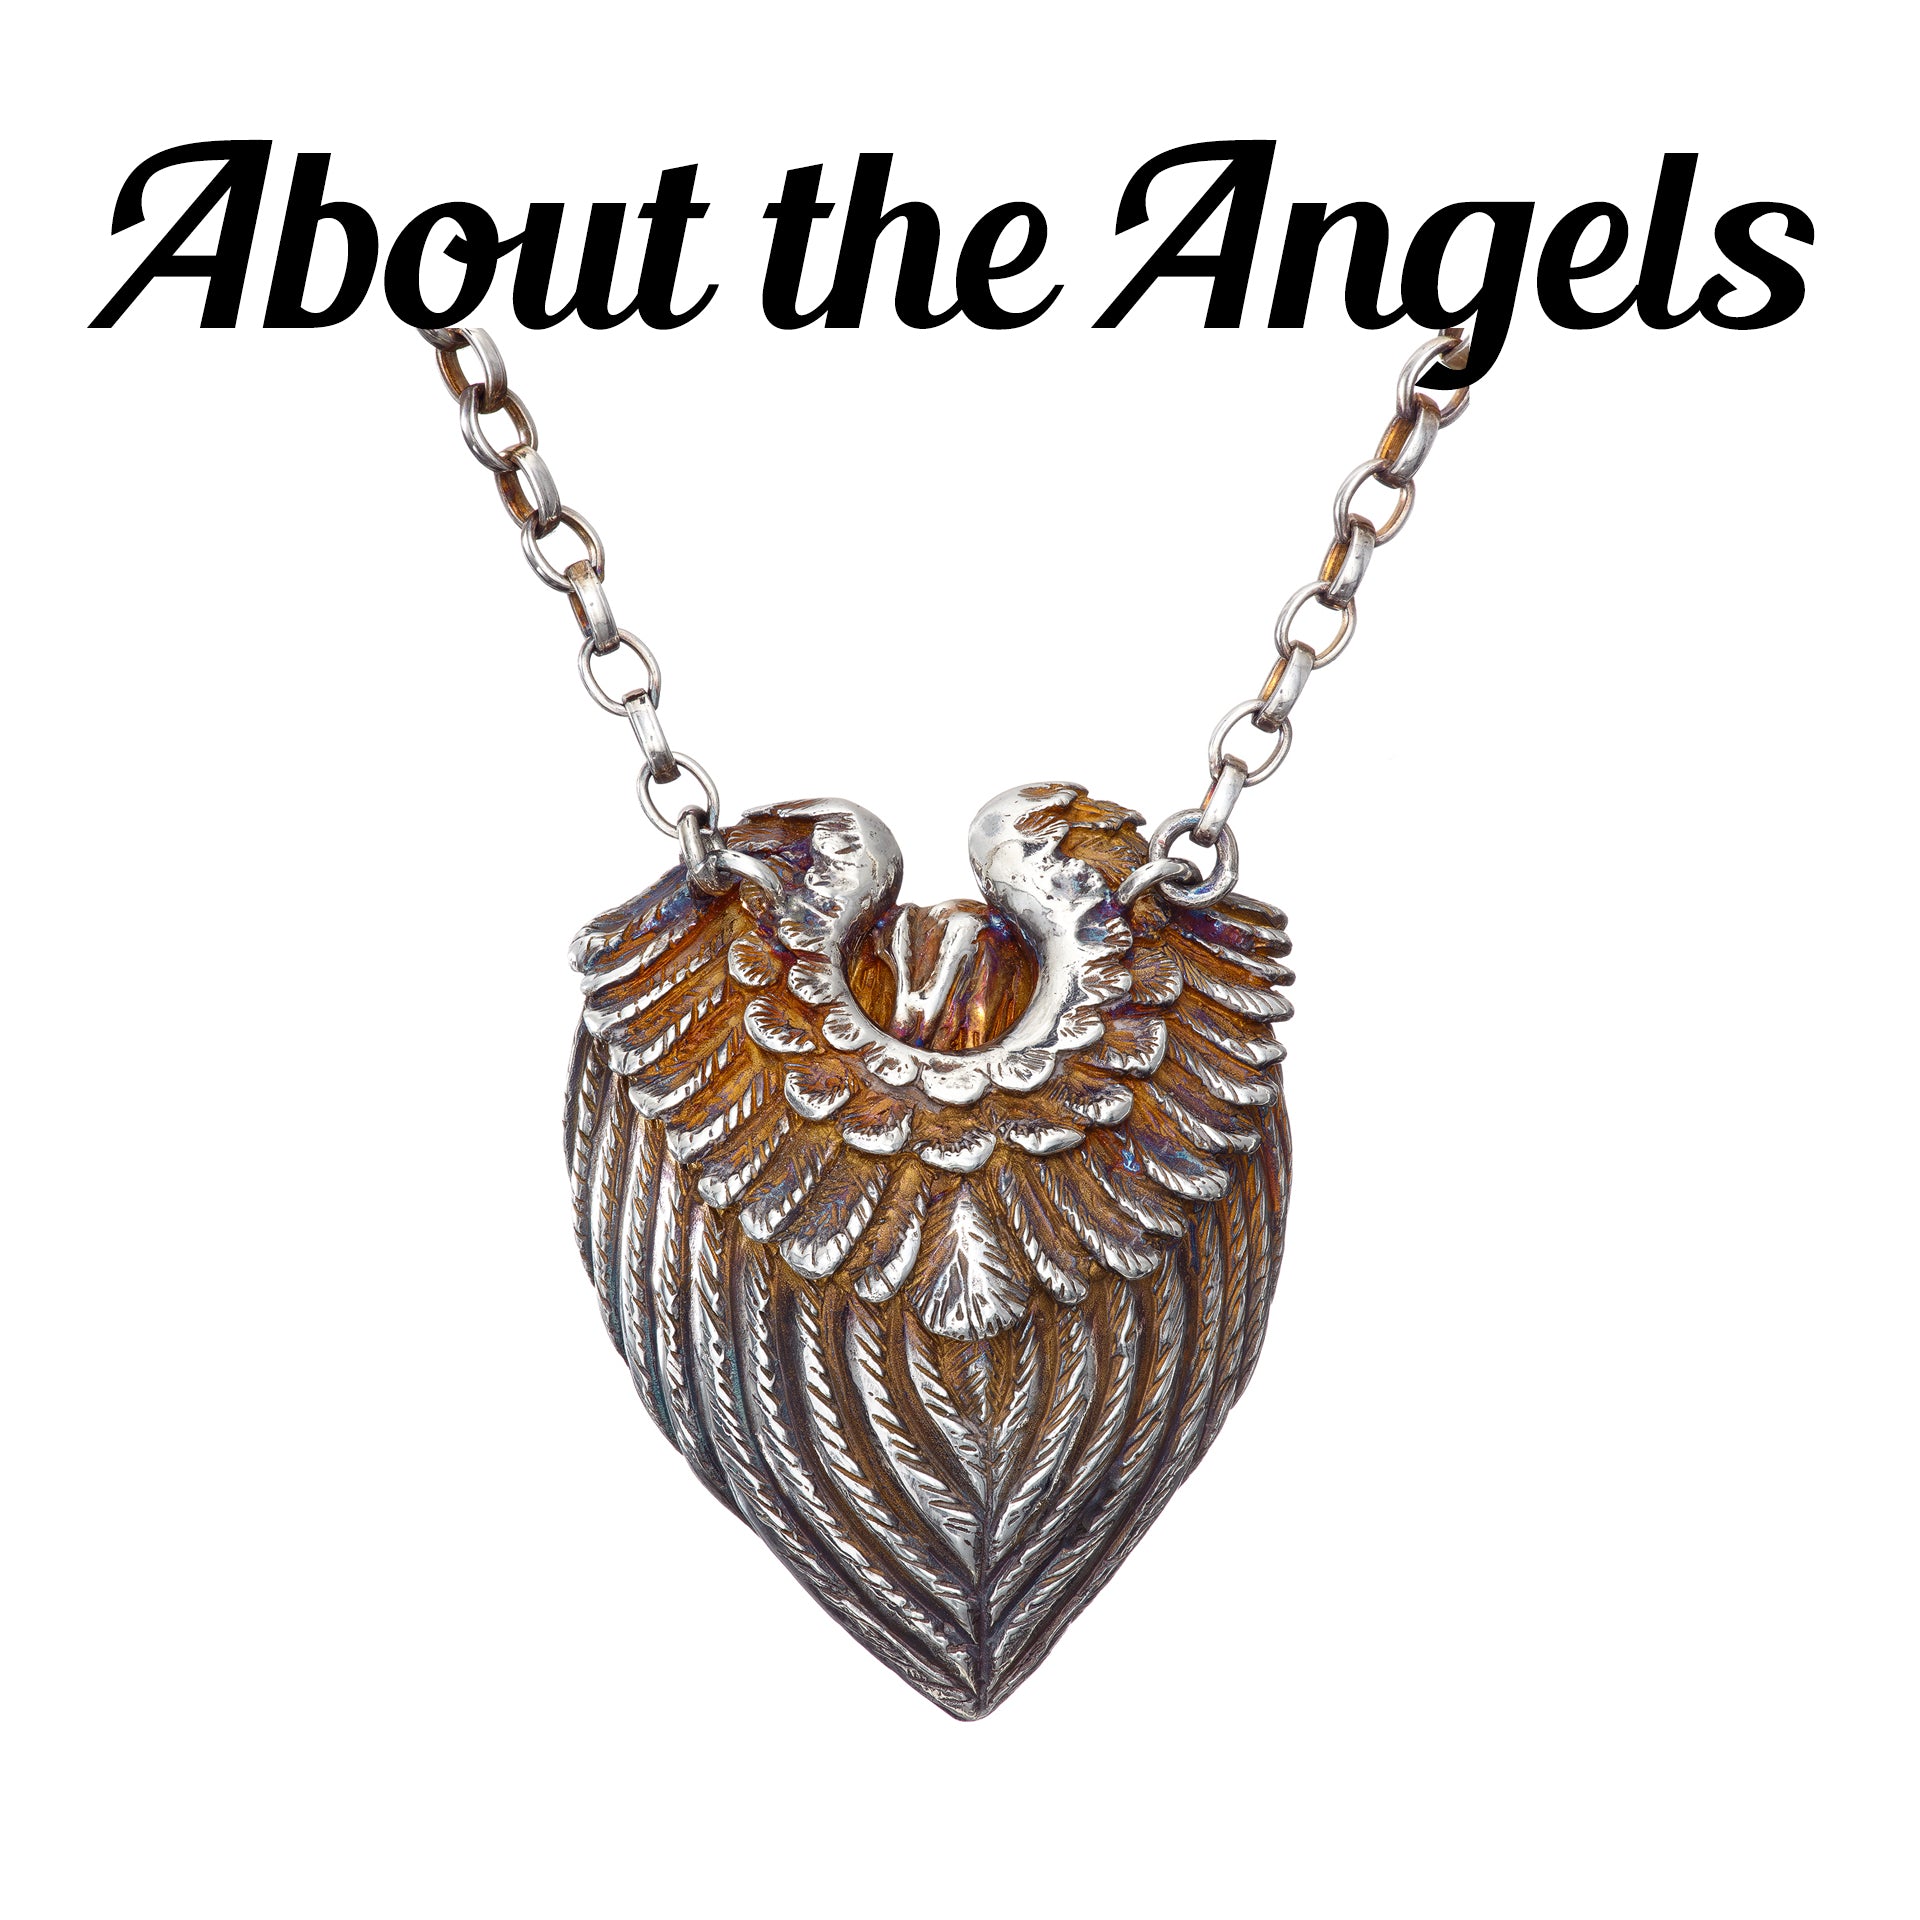 A glimpse into the My Angel Jewellery Collection by Irish Designer Elena Brennan.